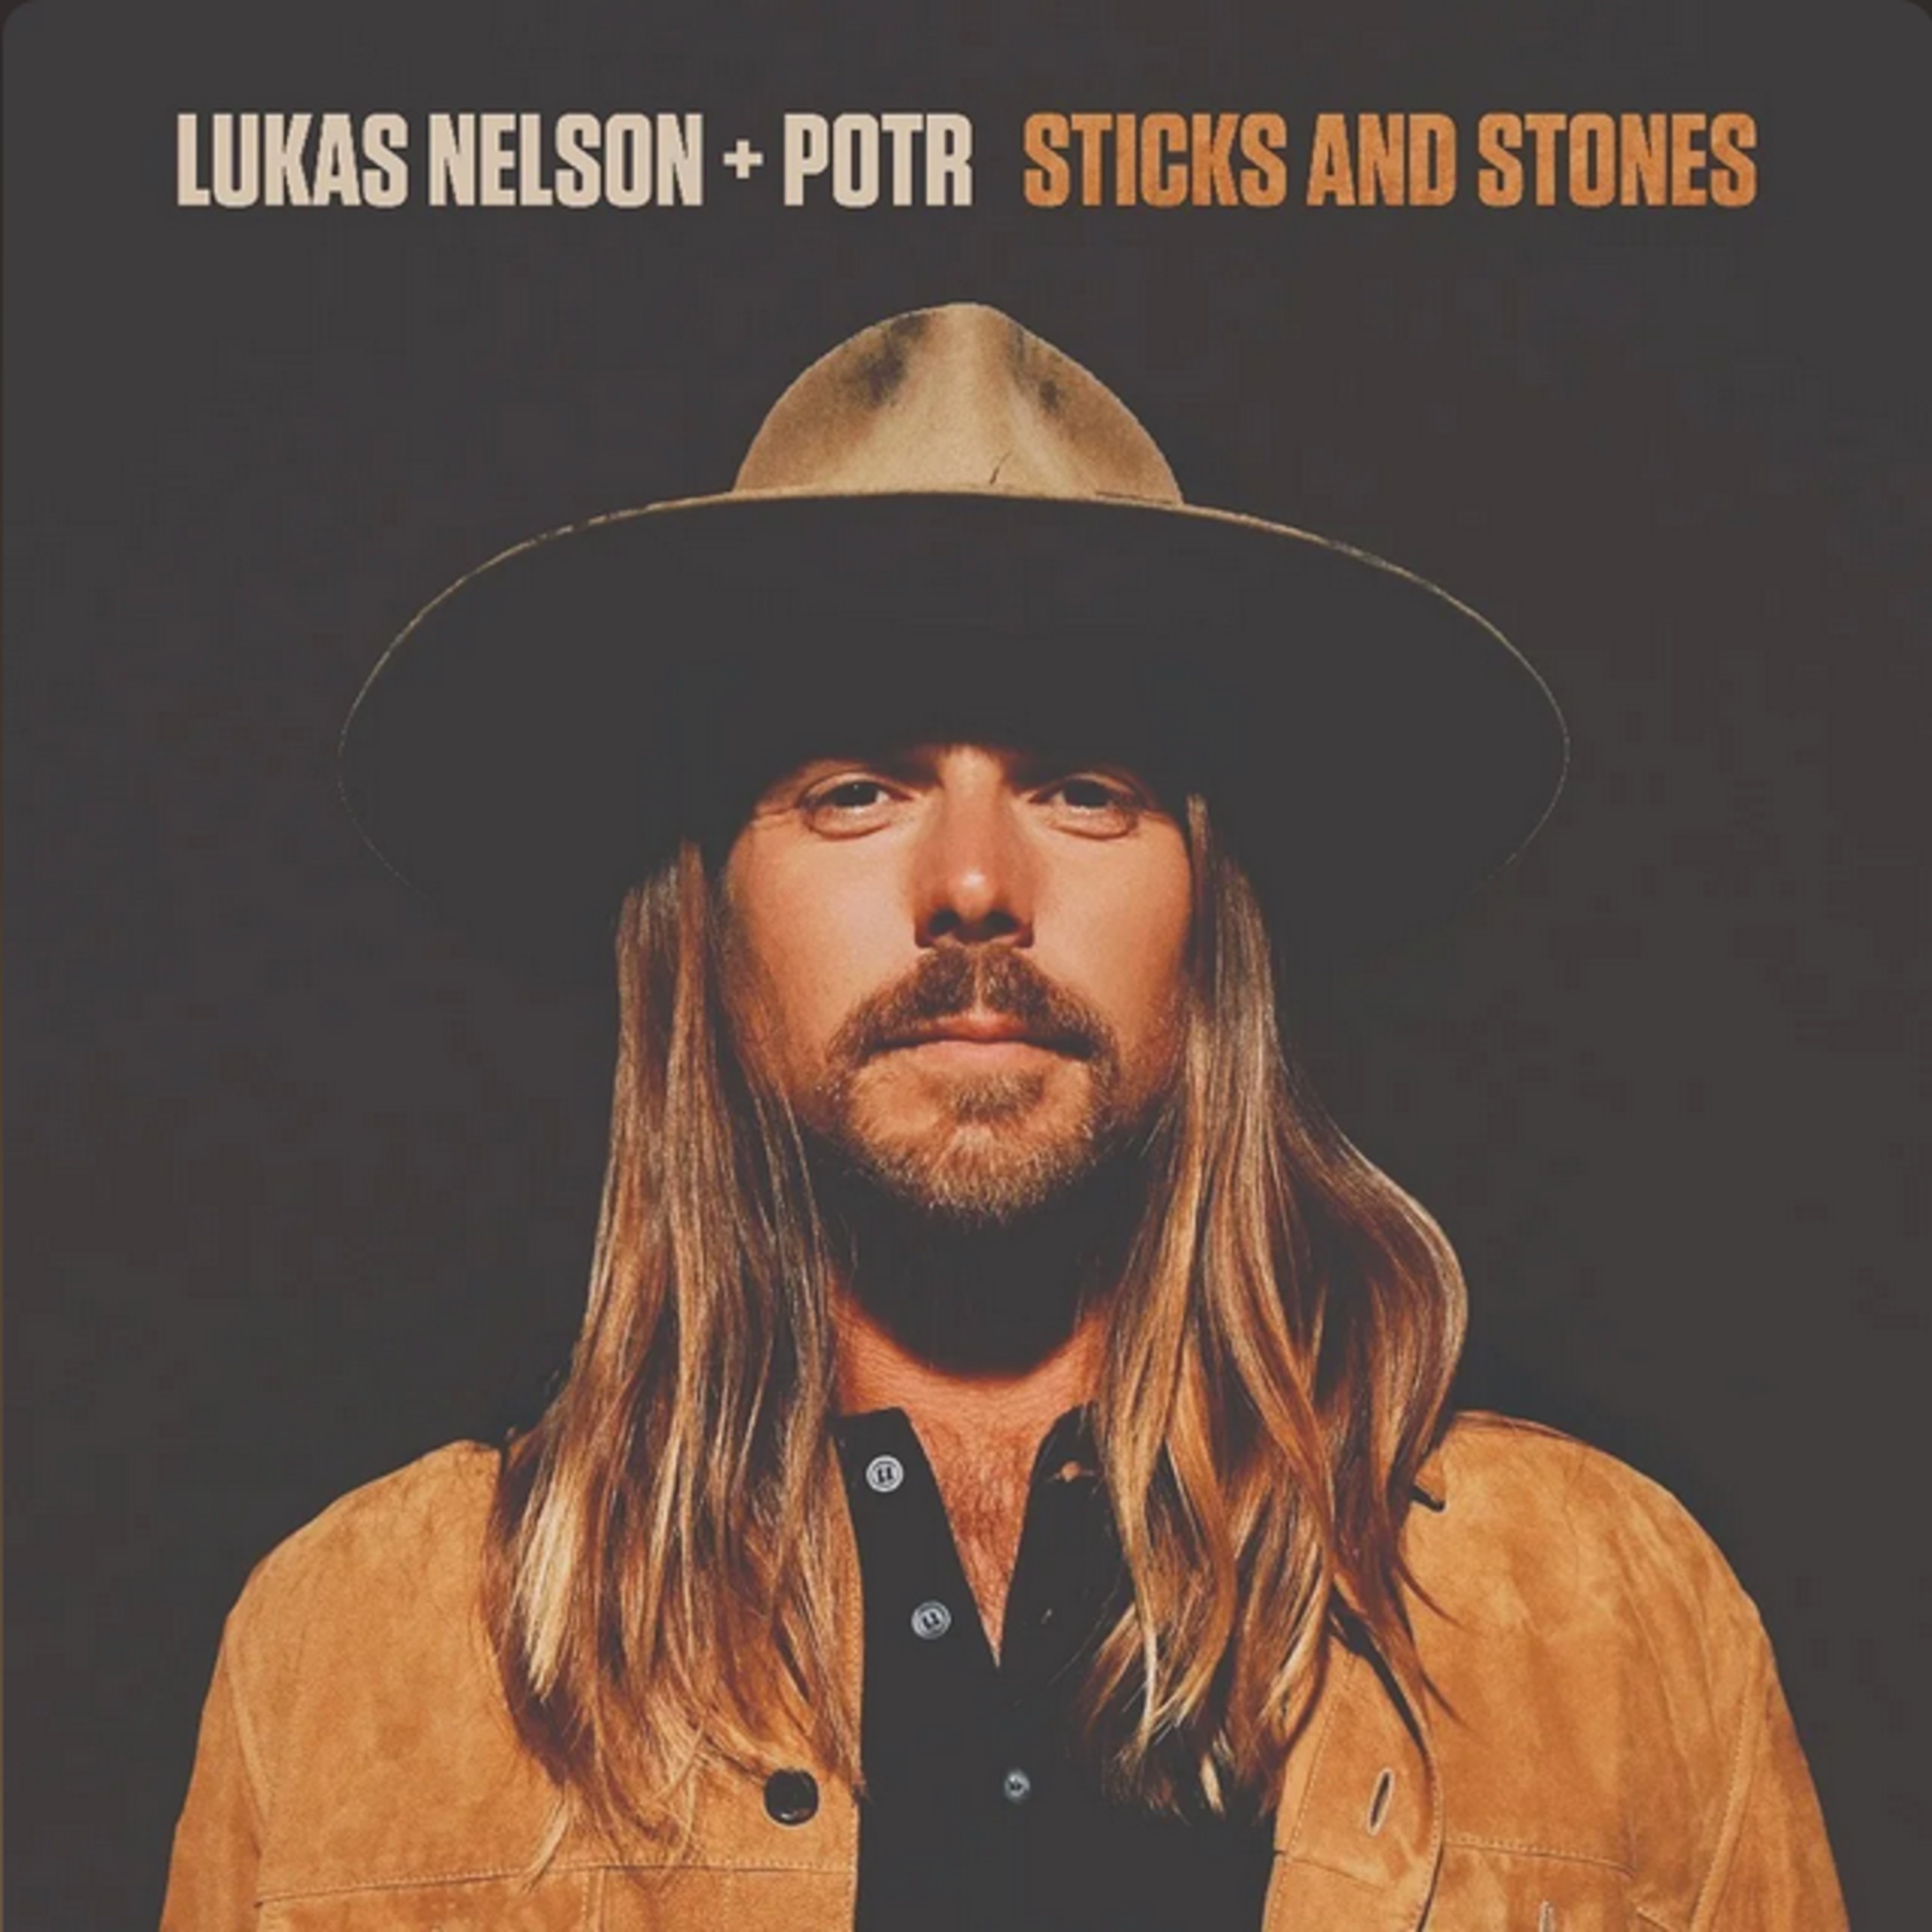 LUKAS NELSON + POTR’S NEW SONG “ALCOHALLELUJAH” DEBUTS TODAY